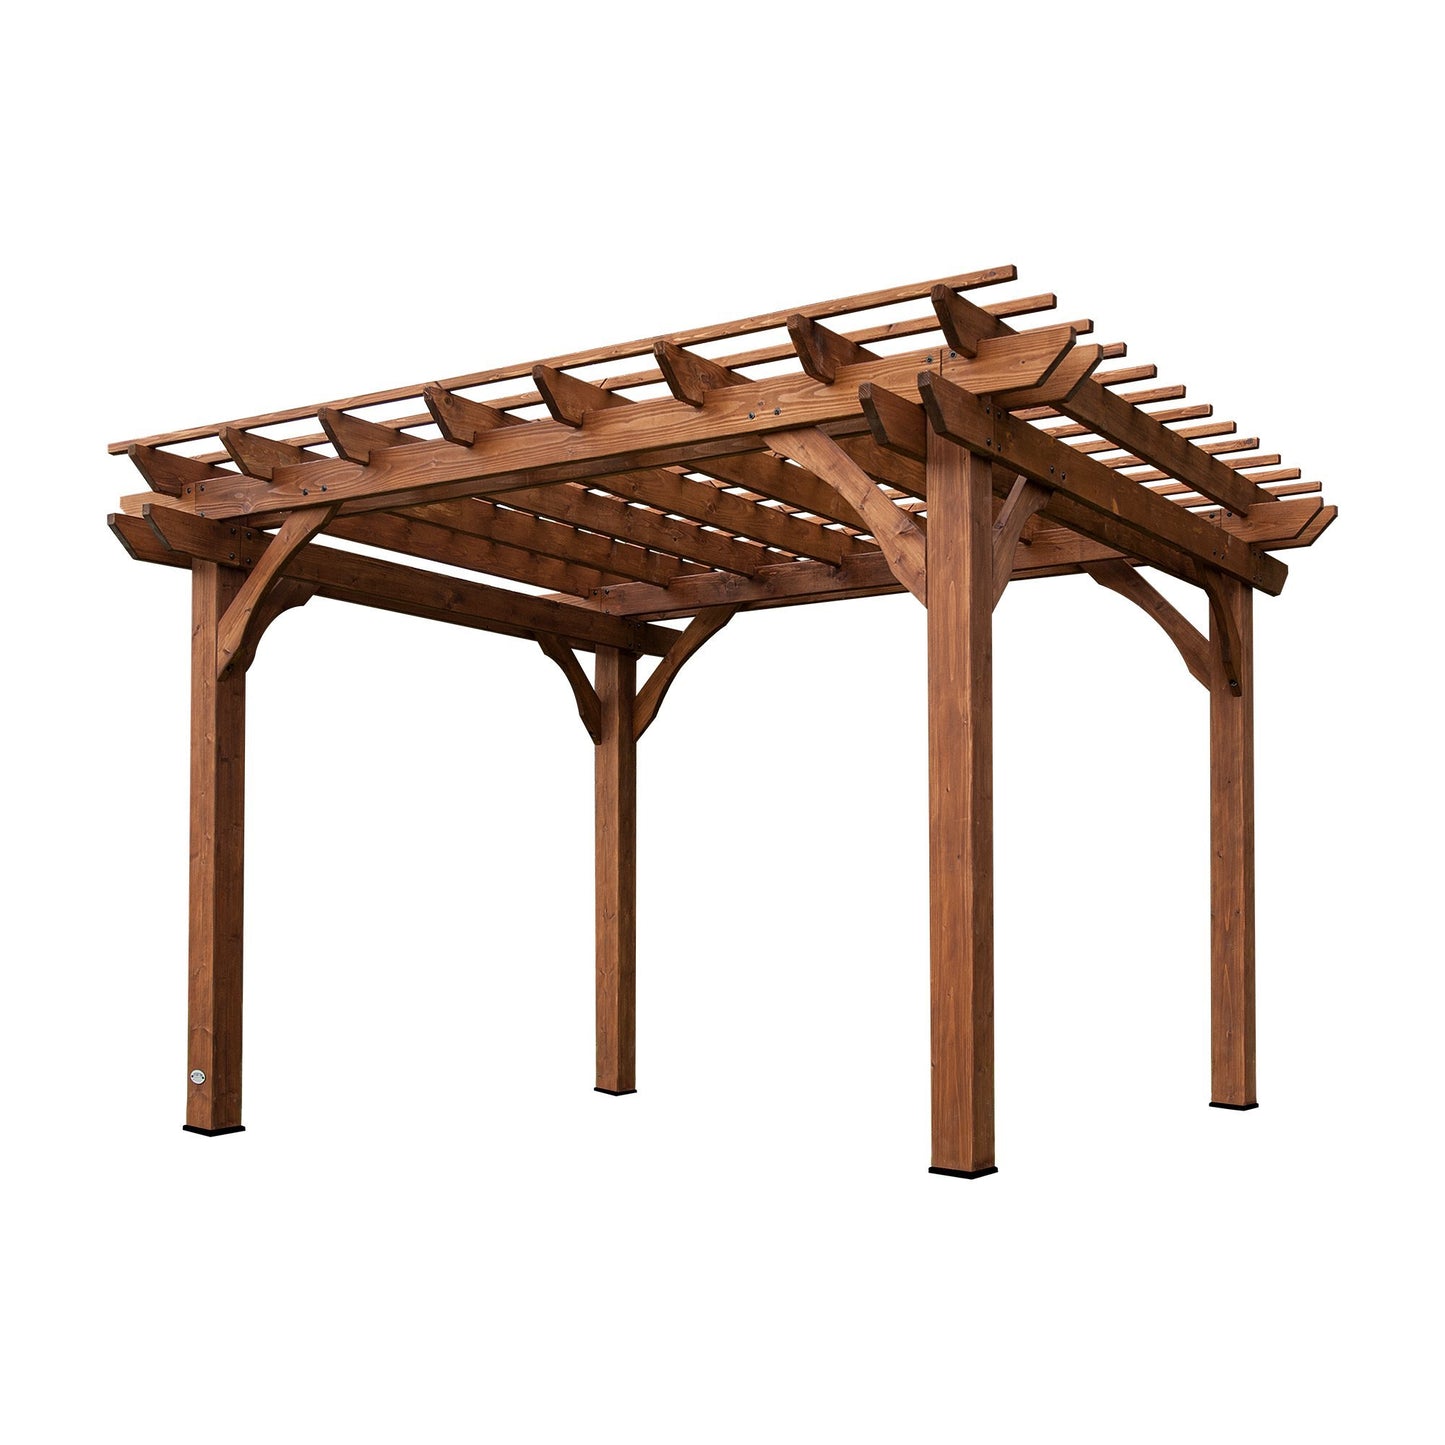 Backyard Discovery 12' by 10' Cedar Wood Pergola, Wind Secure, Strong, Quality Made, Rot Resistant, Concrete Anchors, Spacious for Outdoor Patio, Deck